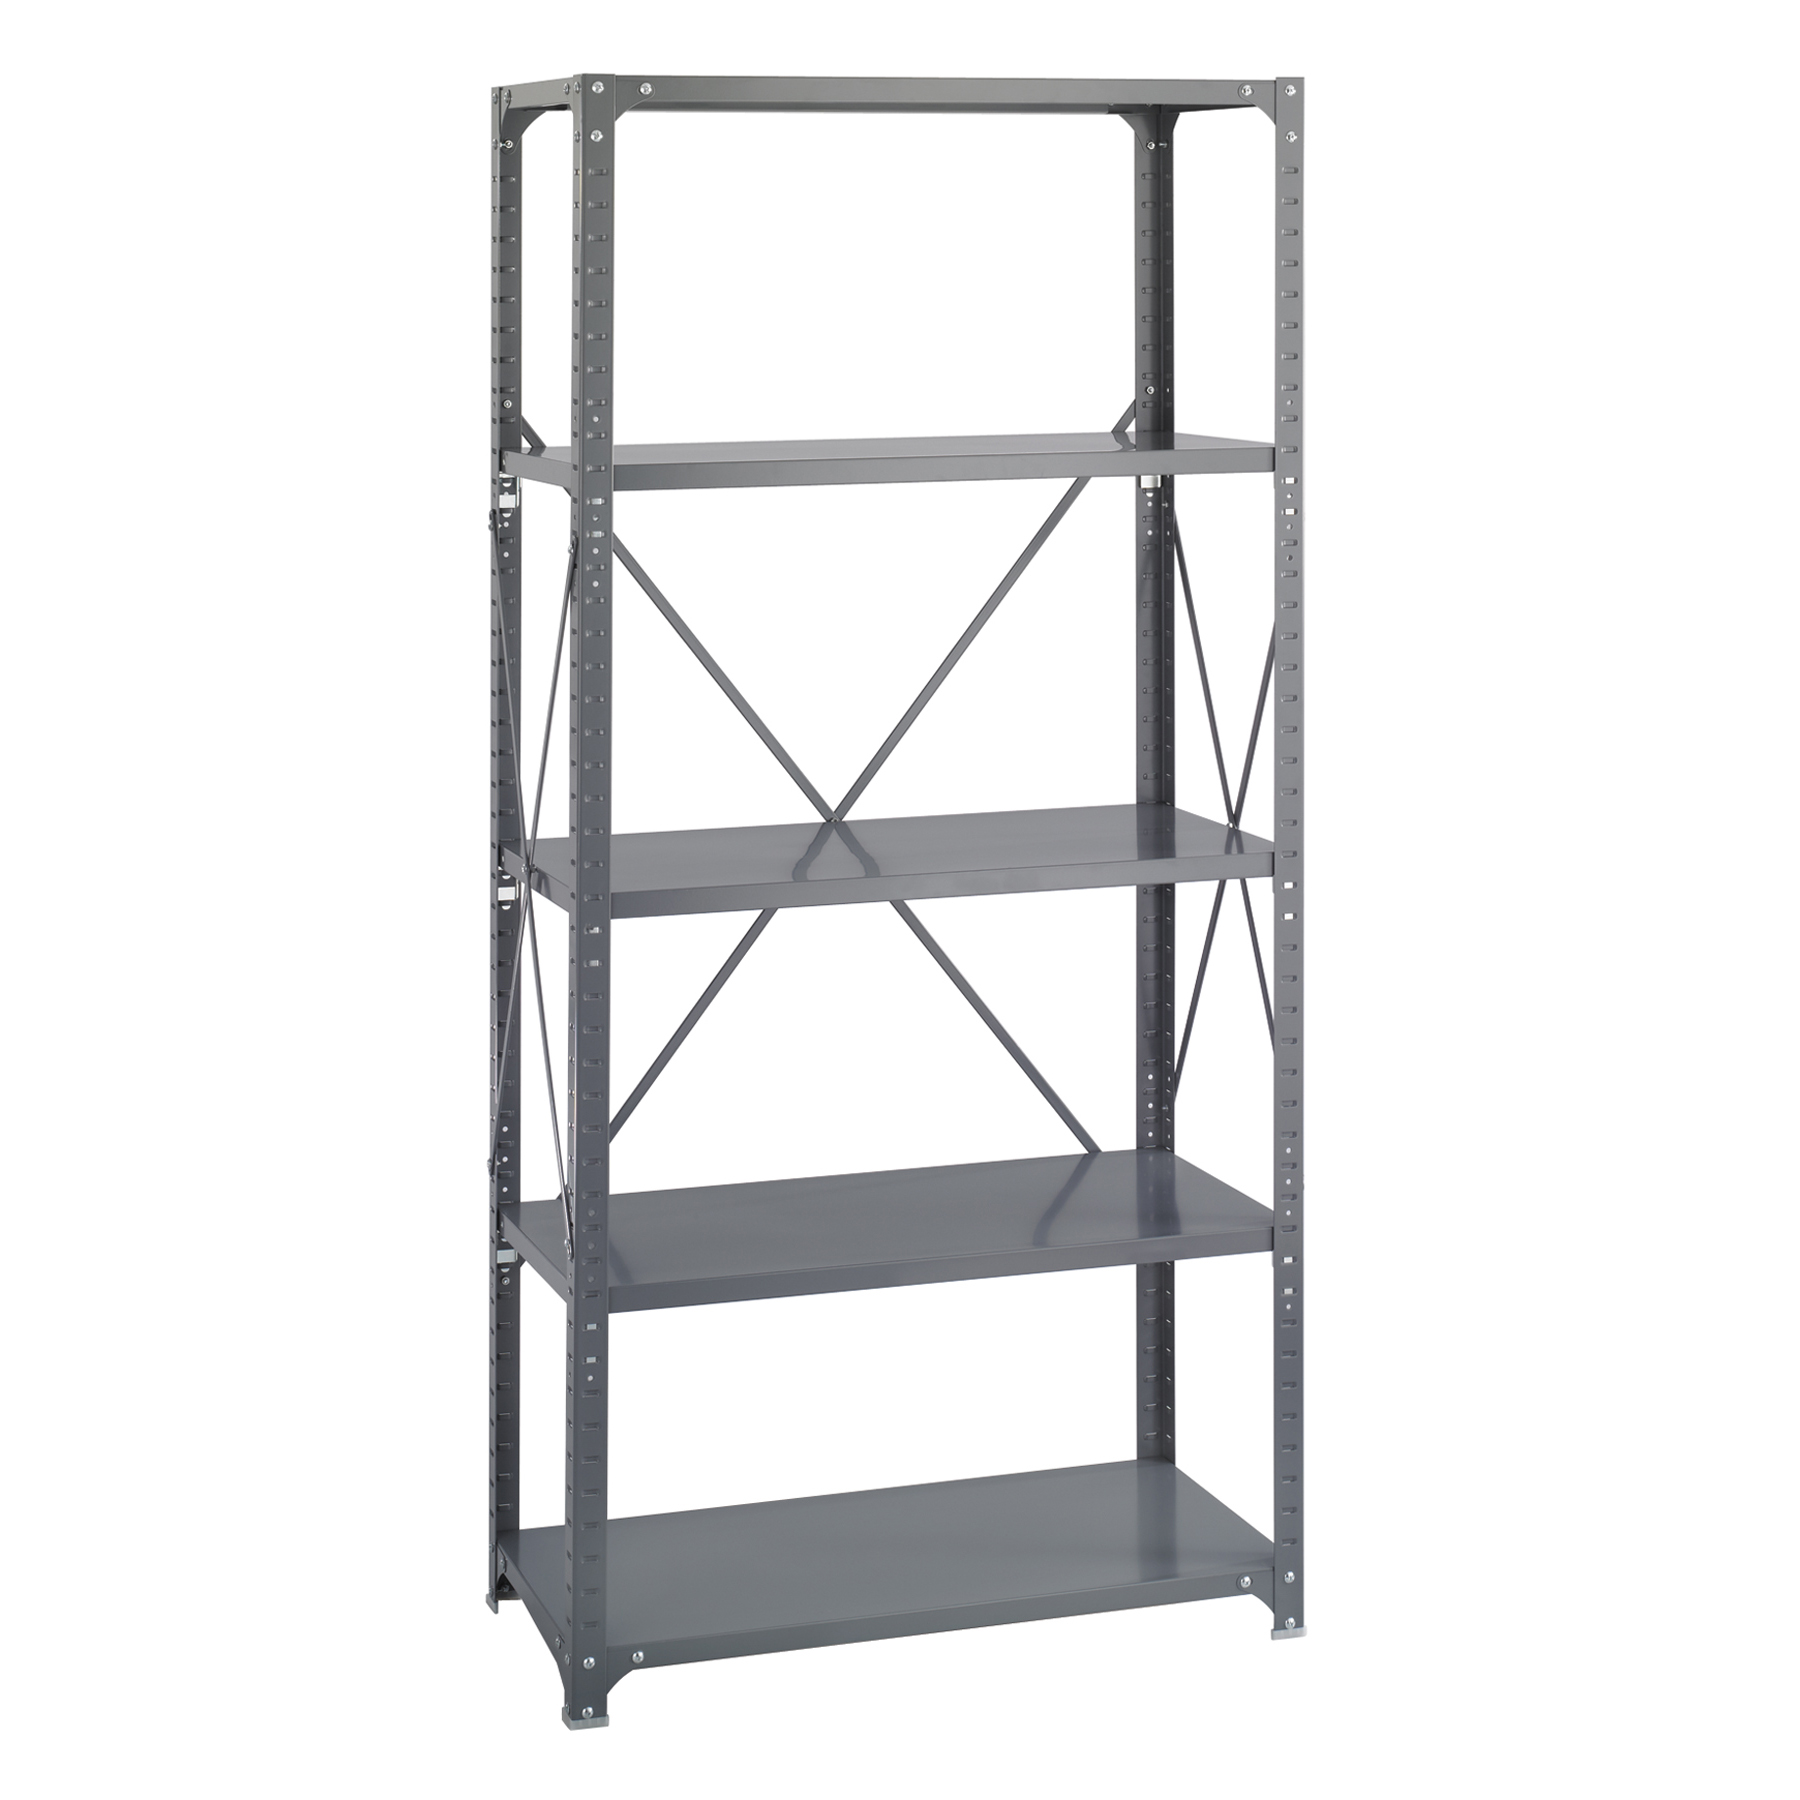 36 x 18 Commercial 5 Shelf Kit | Safco Products